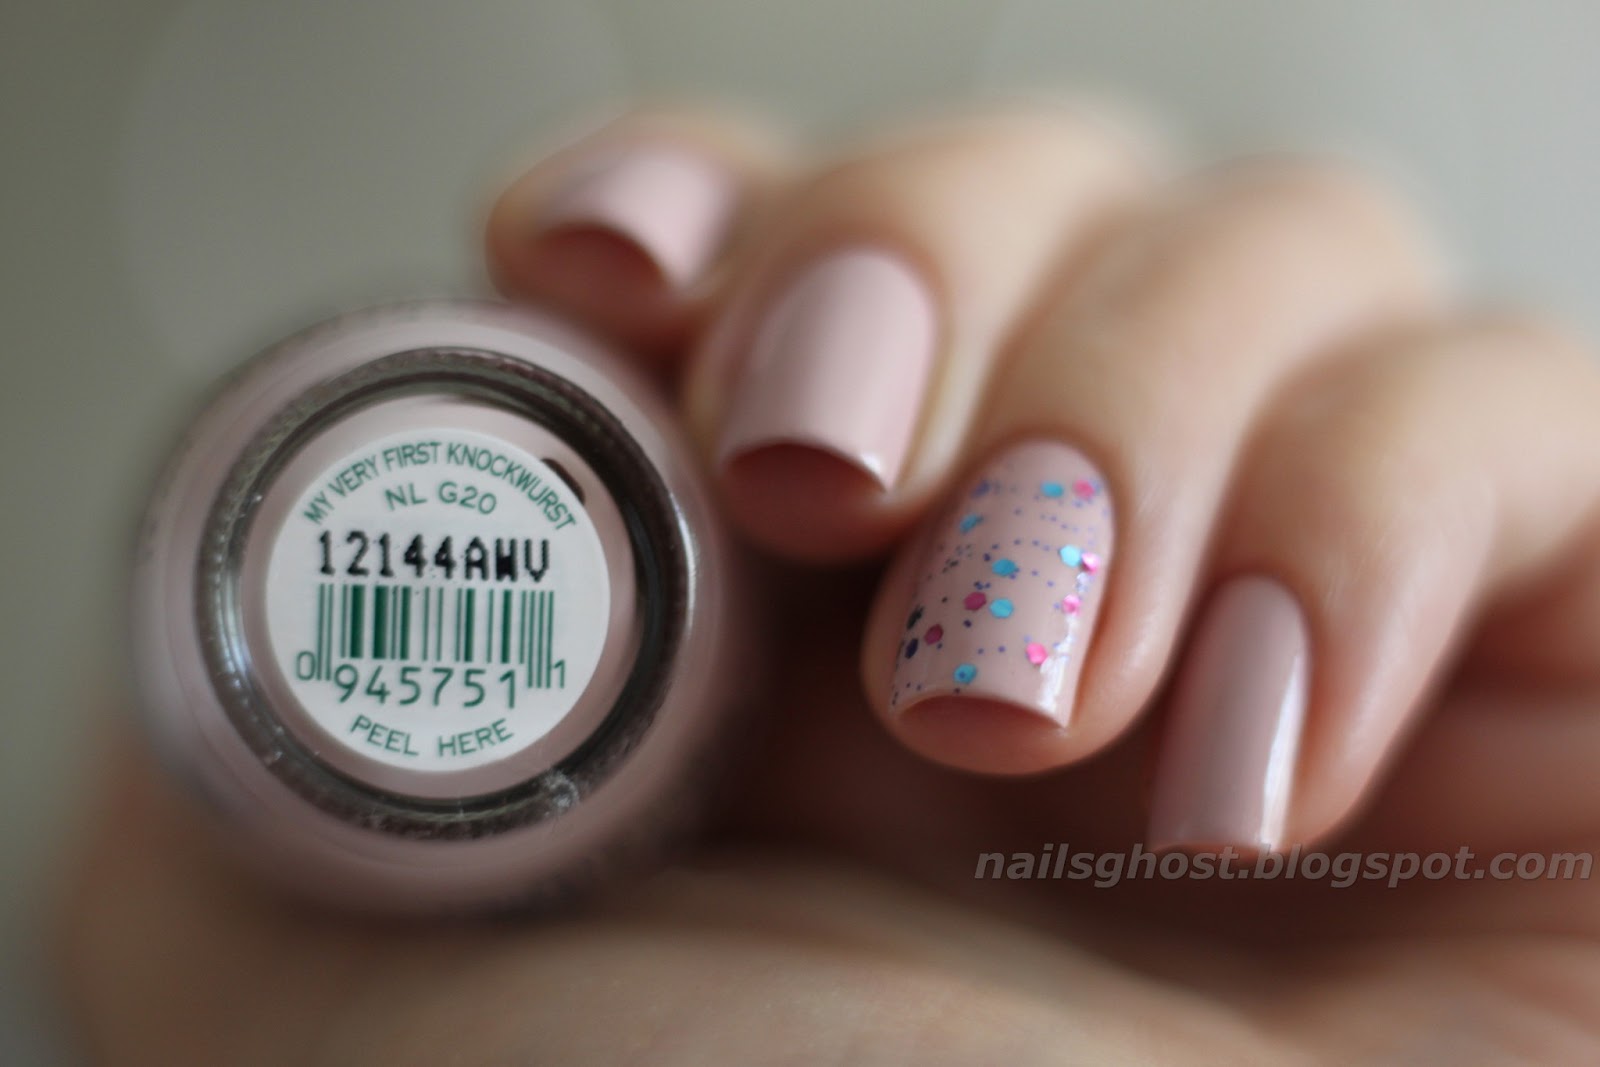 Nailsghost Opi My Very First Knockwurst Nl G